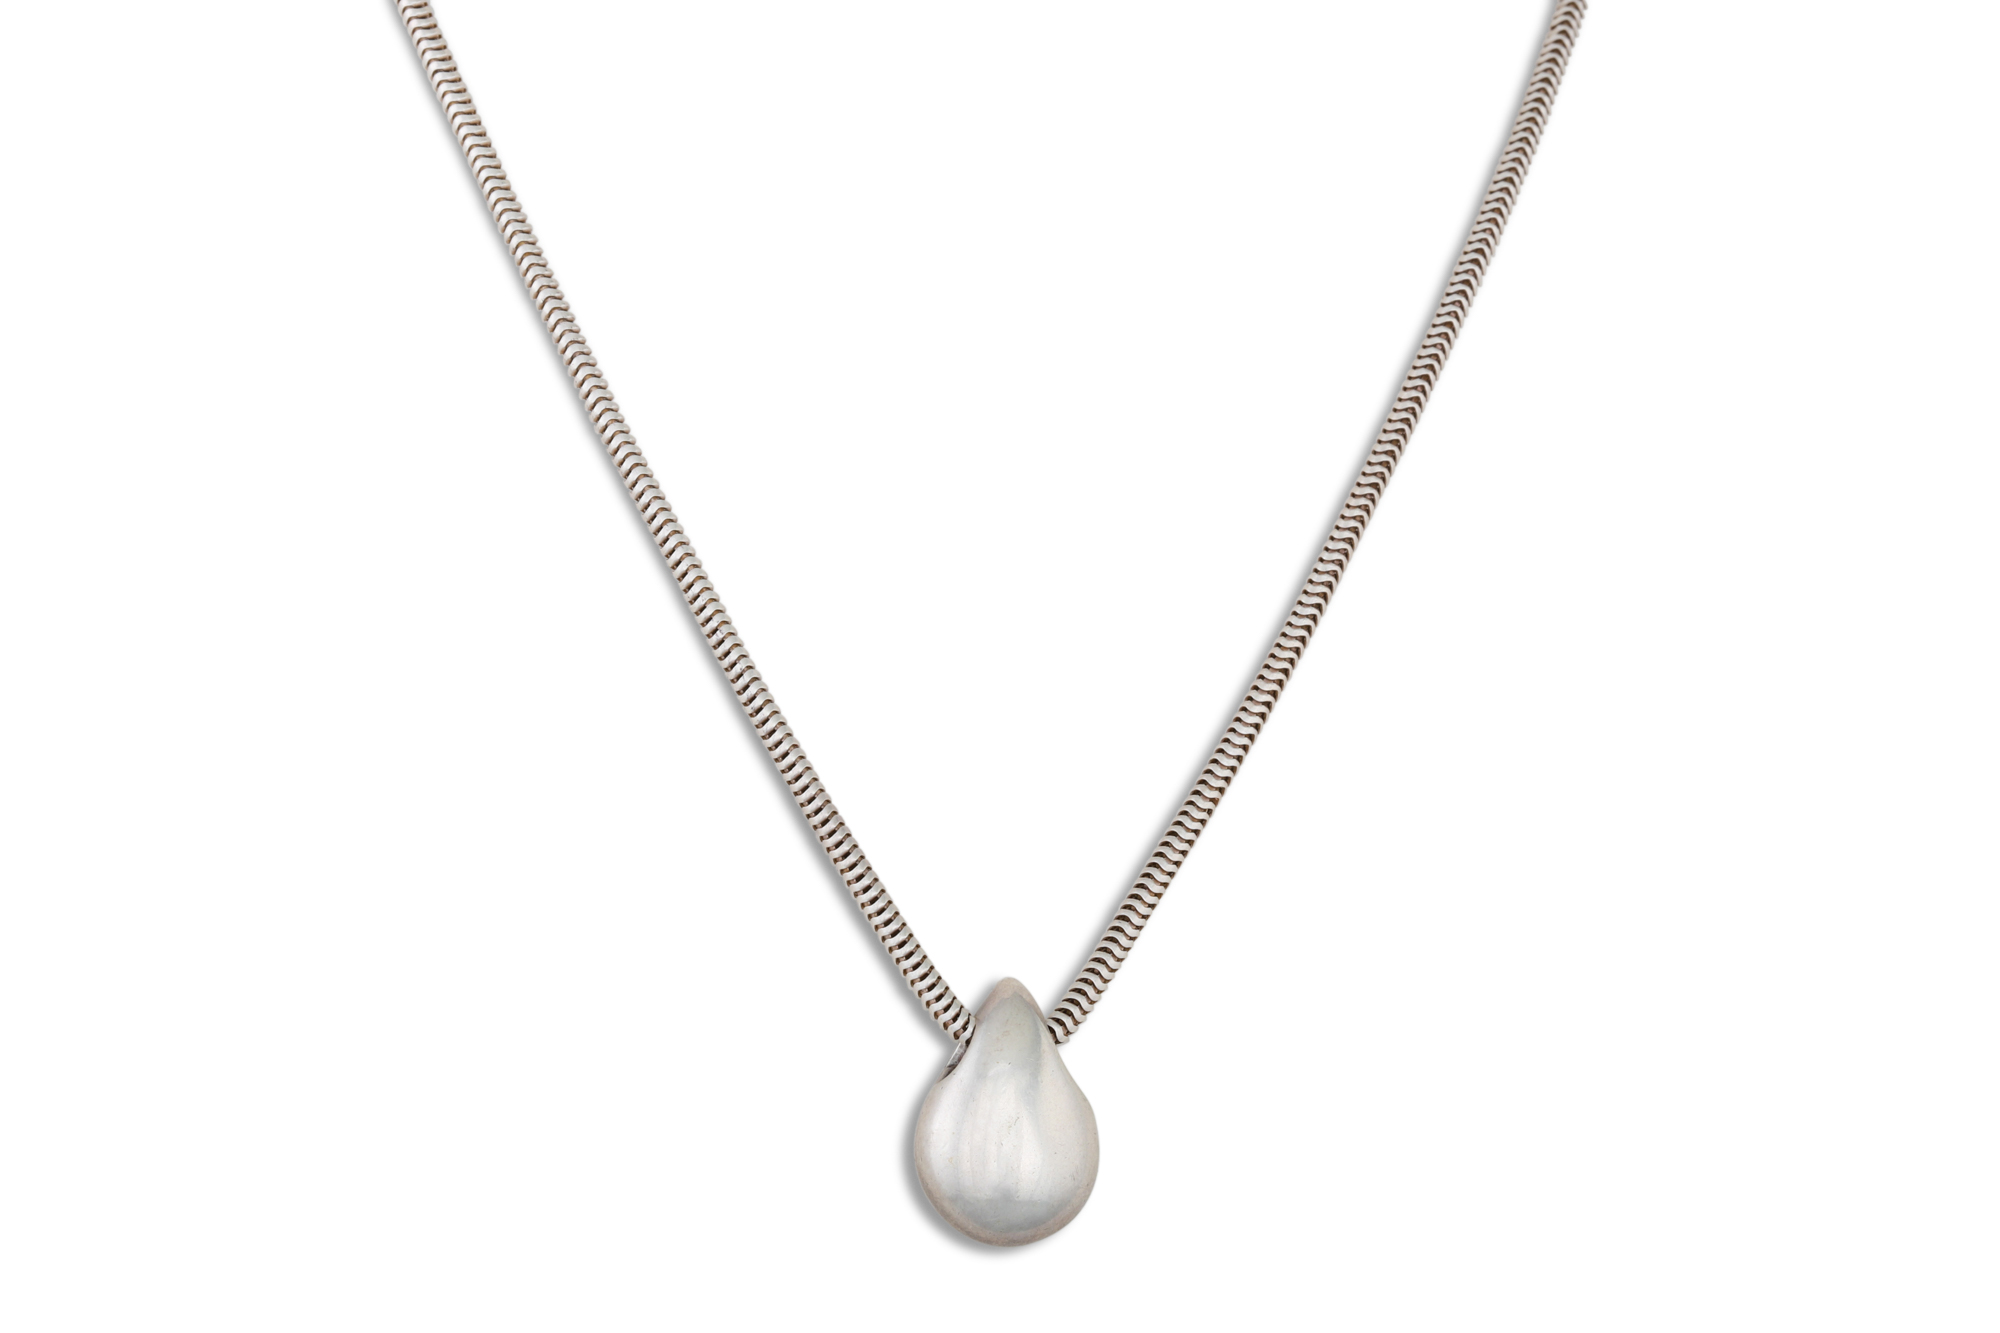 A SUITE OF SILVER JEWELLERY, comprising an abstract pendant on a chain, together with matching - Image 3 of 3